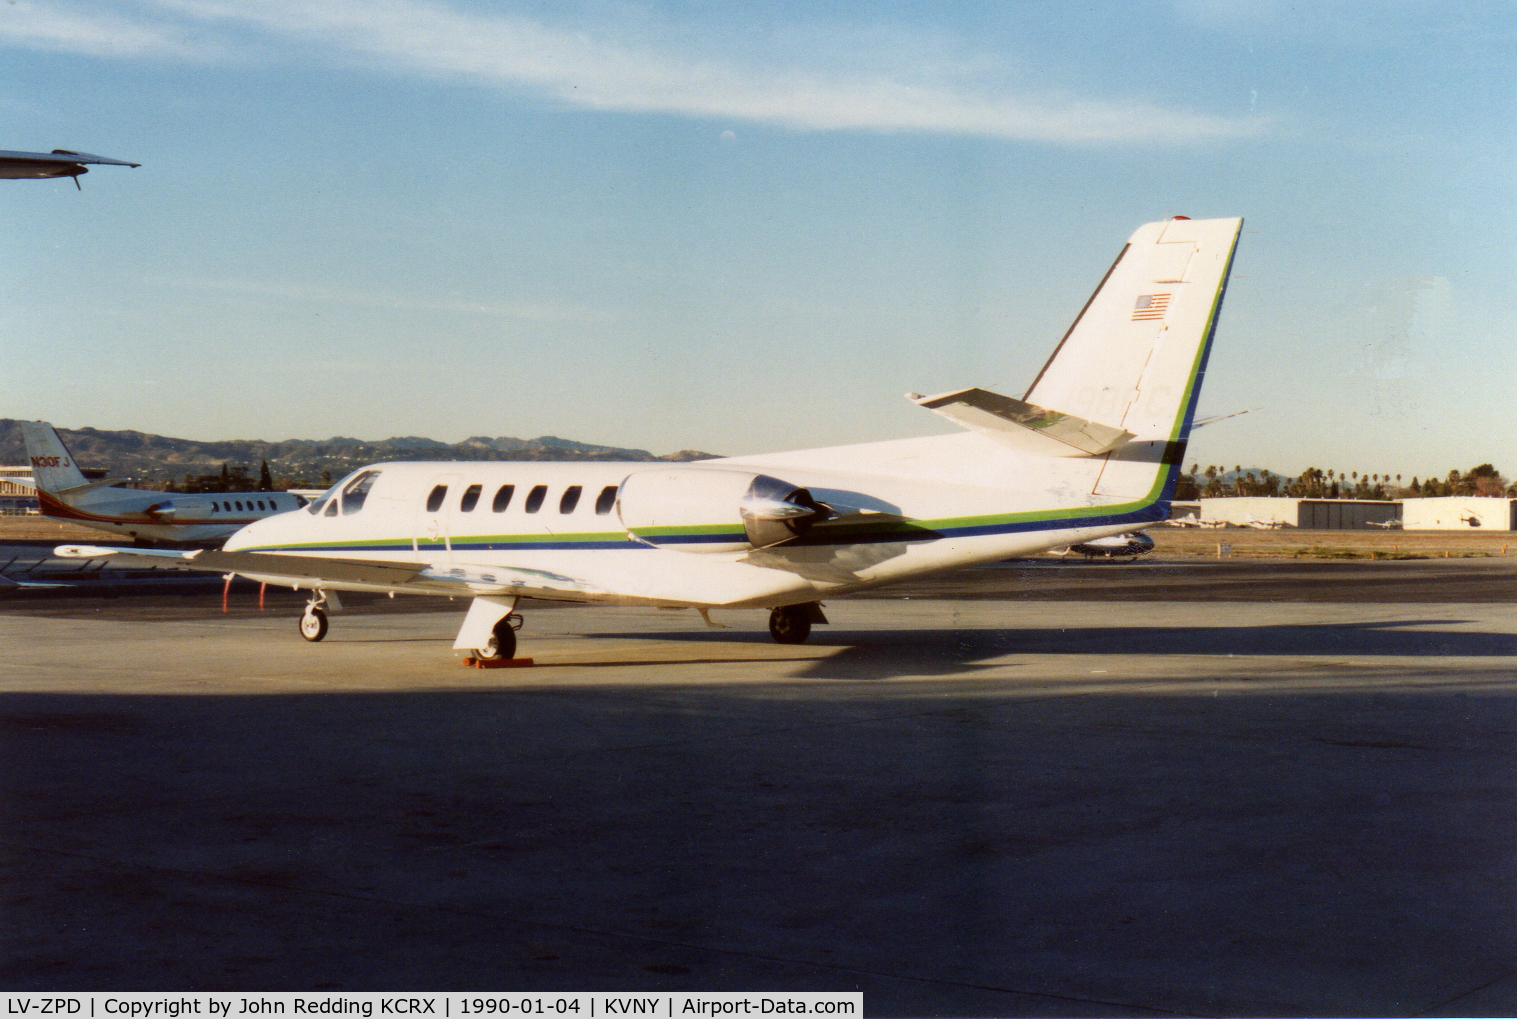 LV-ZPD, 1982 Cessna 550 Citation II C/N 550-0406, Was N398CC at the time